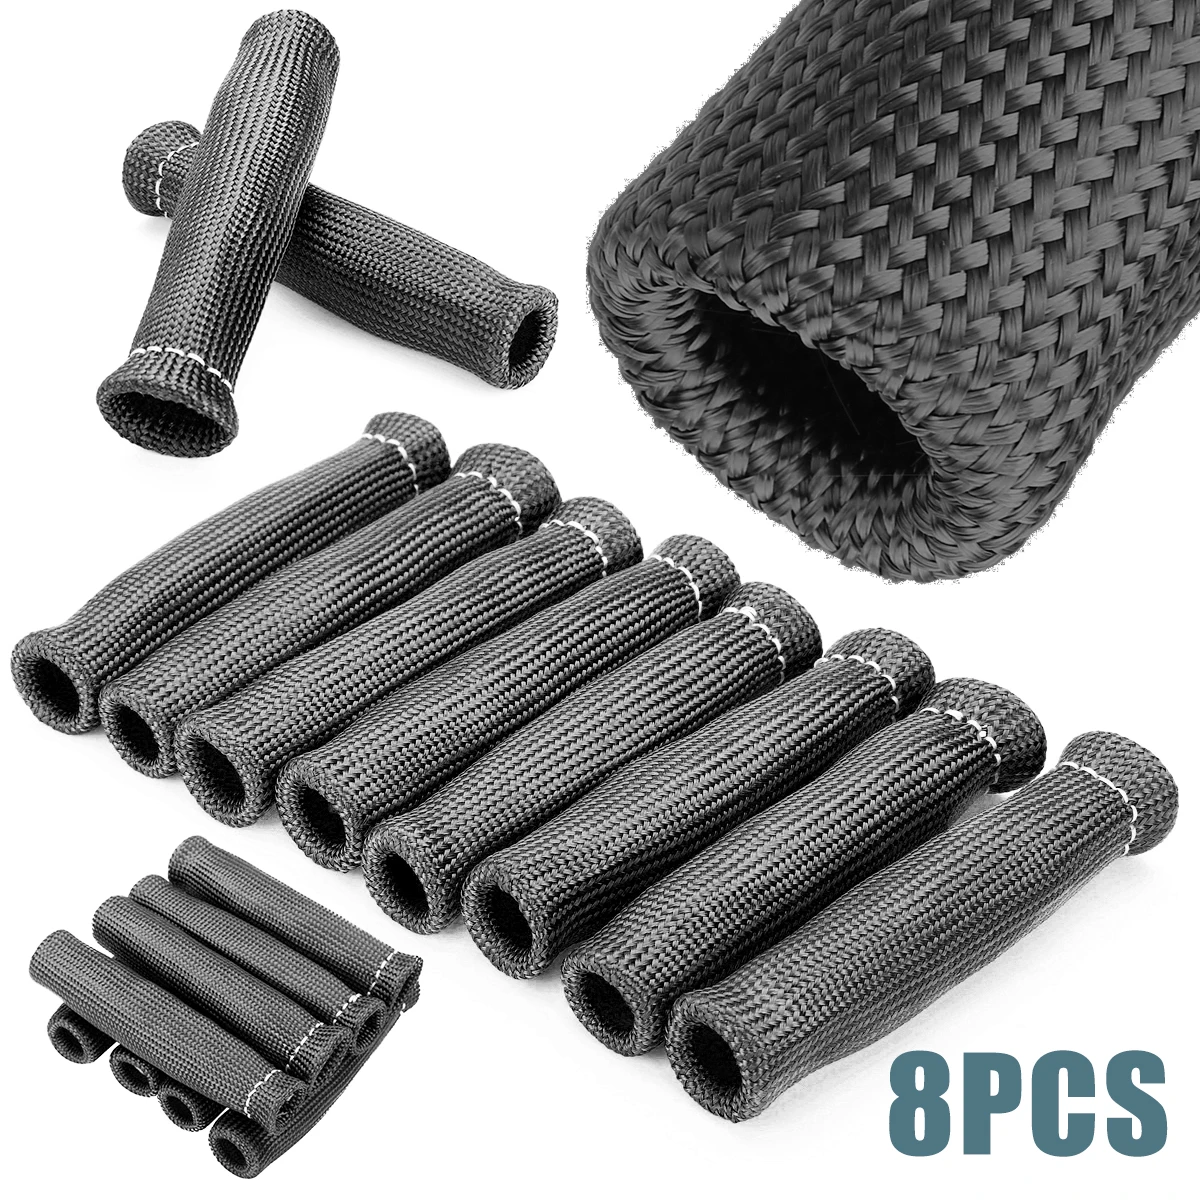 8PCS 2500° Spark Plug Wire Boots Protectors Black Sleeve Heat Shield Cover